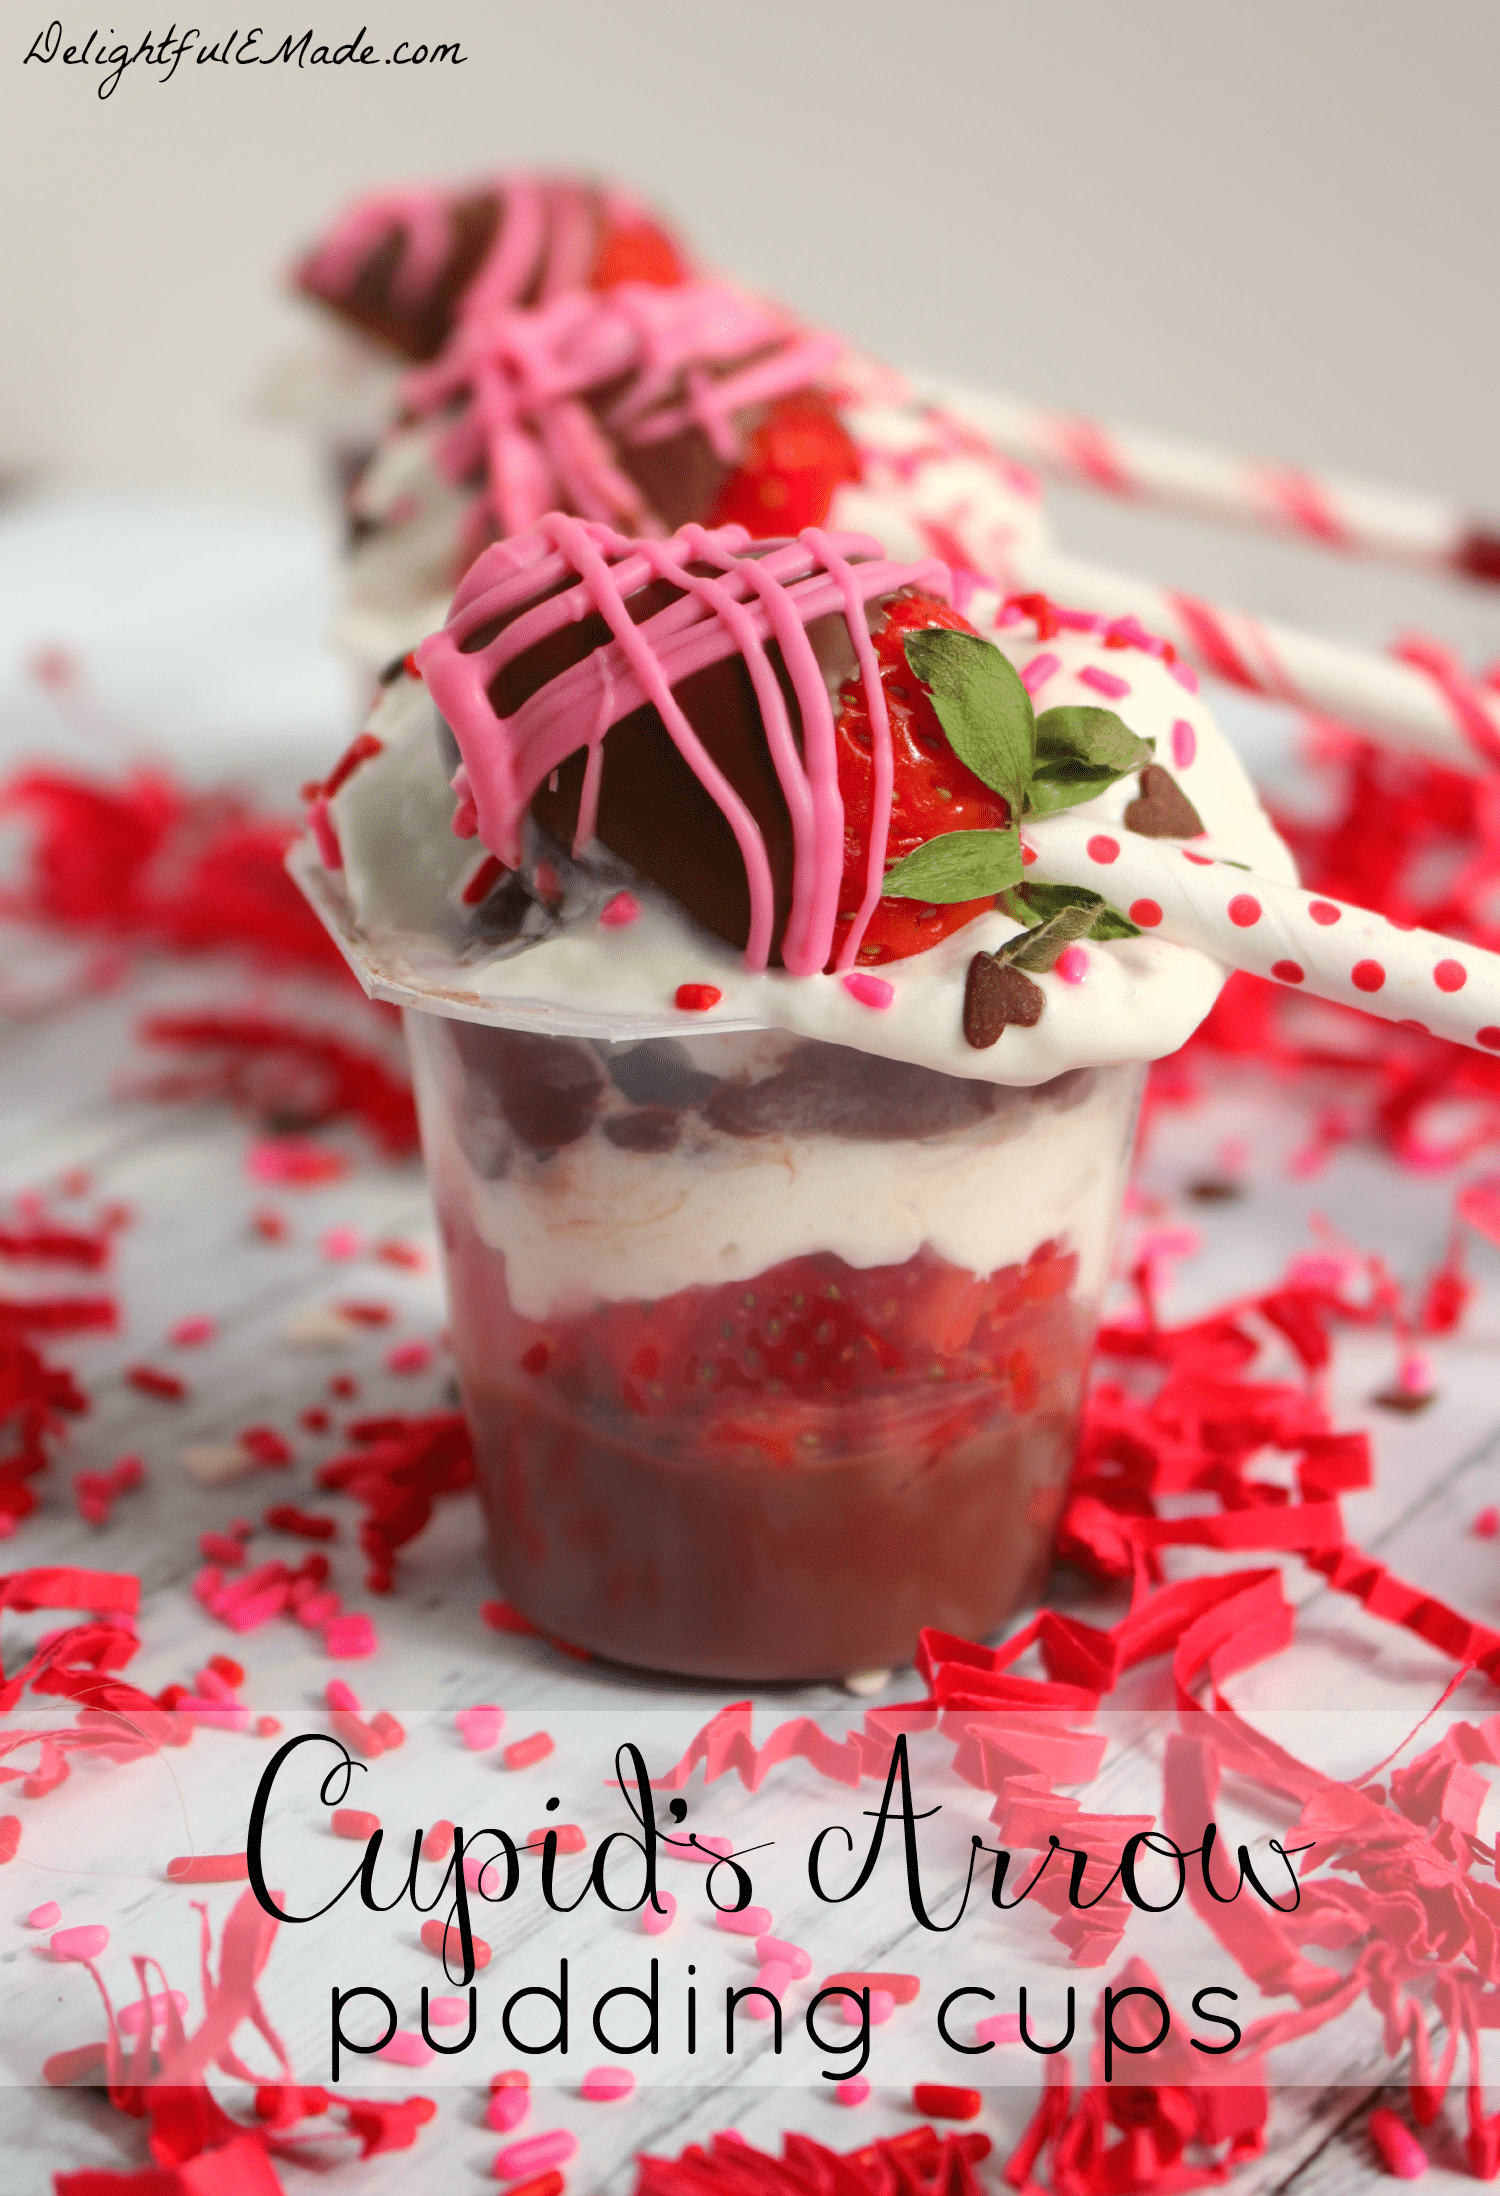 Made with Snack Pack Pudding Cups, and topped with chocolate covered strawberry cupid arrows, these snacks are perfect for celebrating your sweethearts!